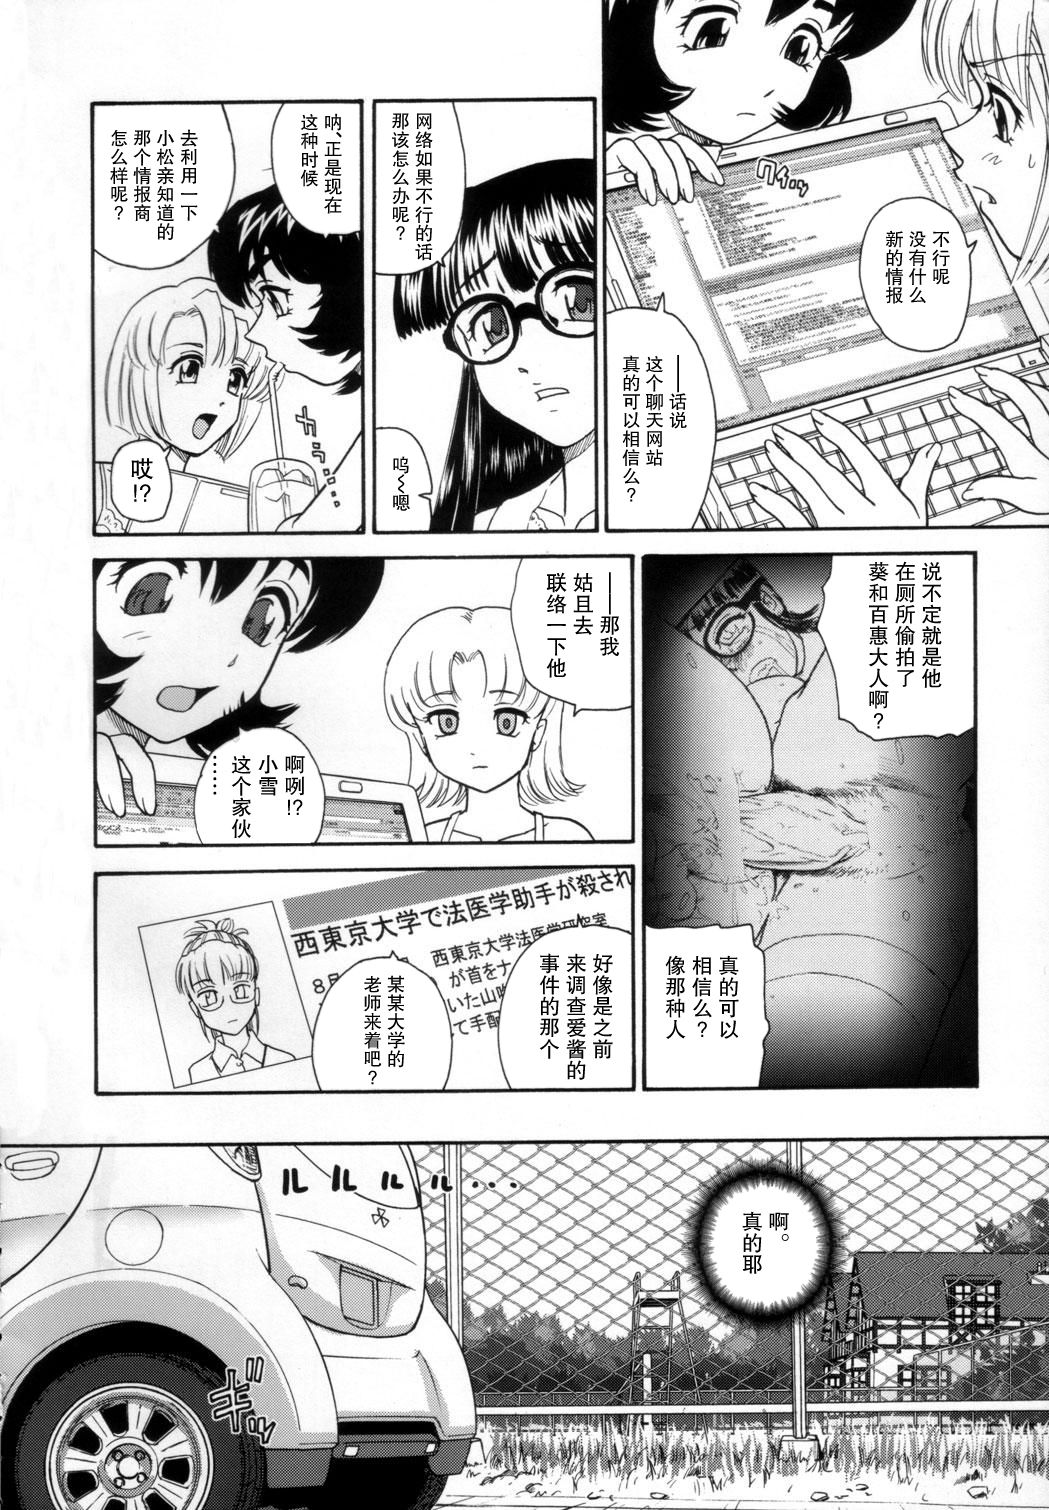 (C72) [Behind Moon (Q)] Dulce Report 9 | 达西报告 9 [Chinese] [哈尼喵汉化组] [Decensored] page 8 full